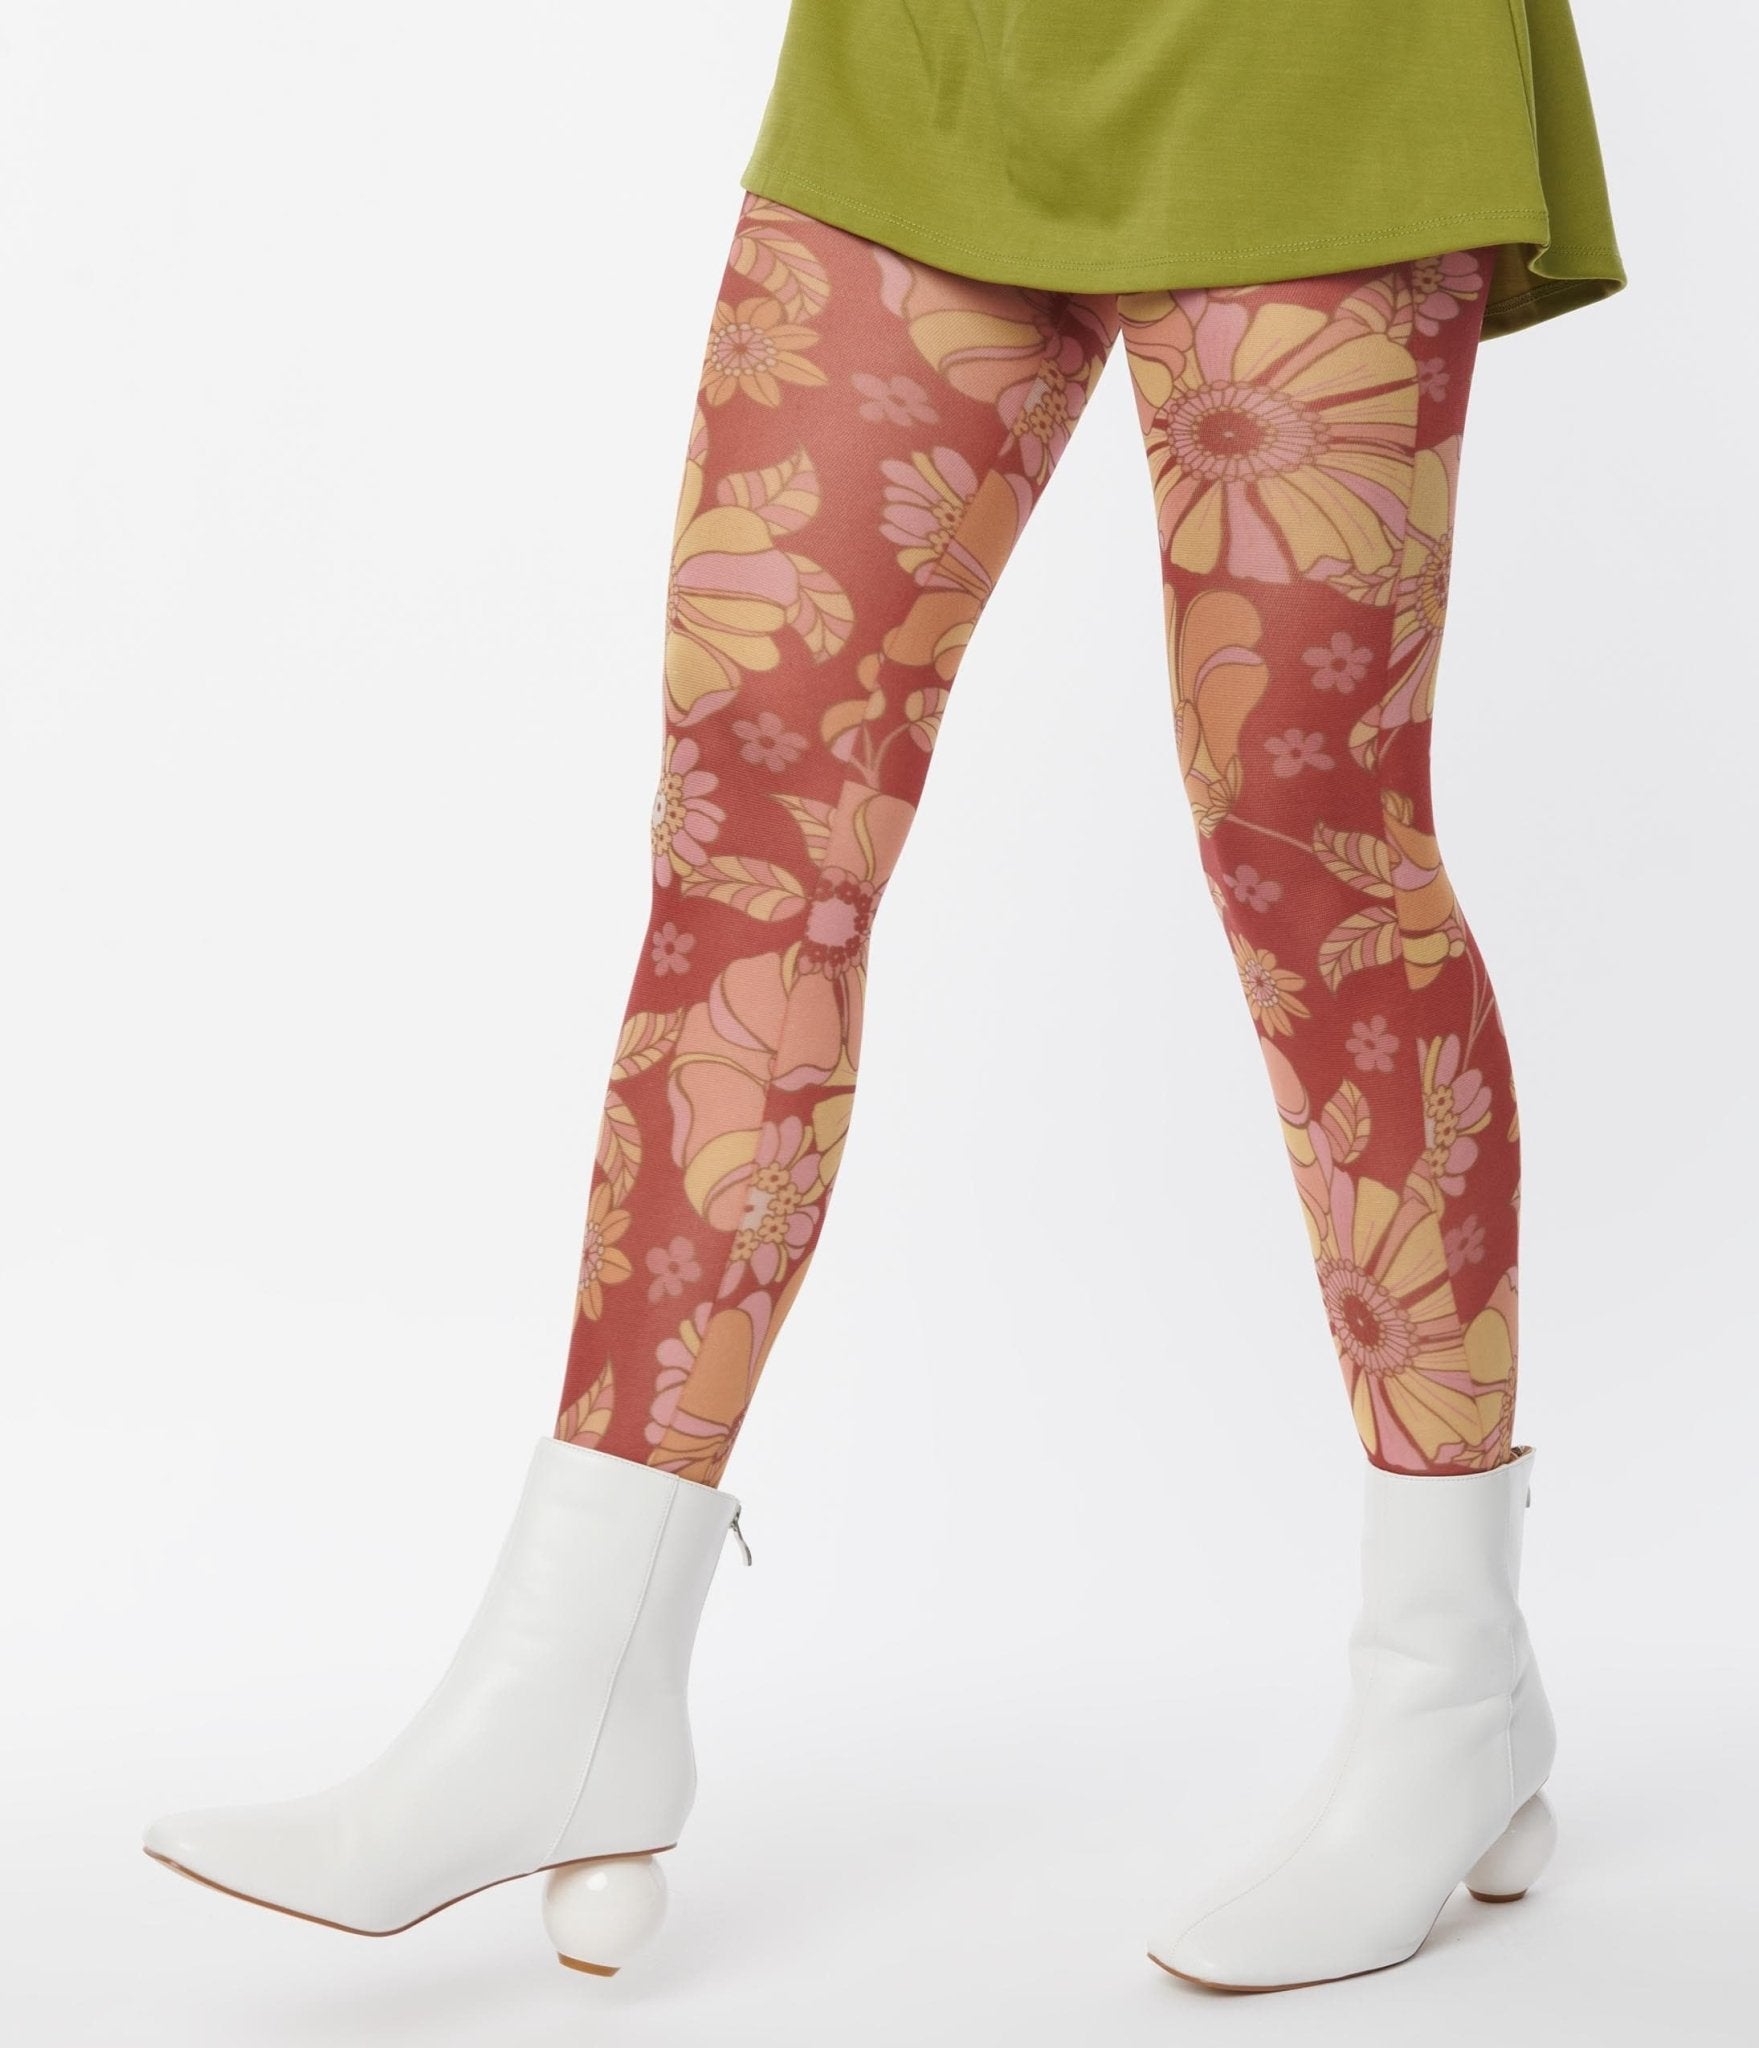 NWTS FREE PEOPLE TIGHTS (L/XL)  Tights, Free people, Vintage floral print